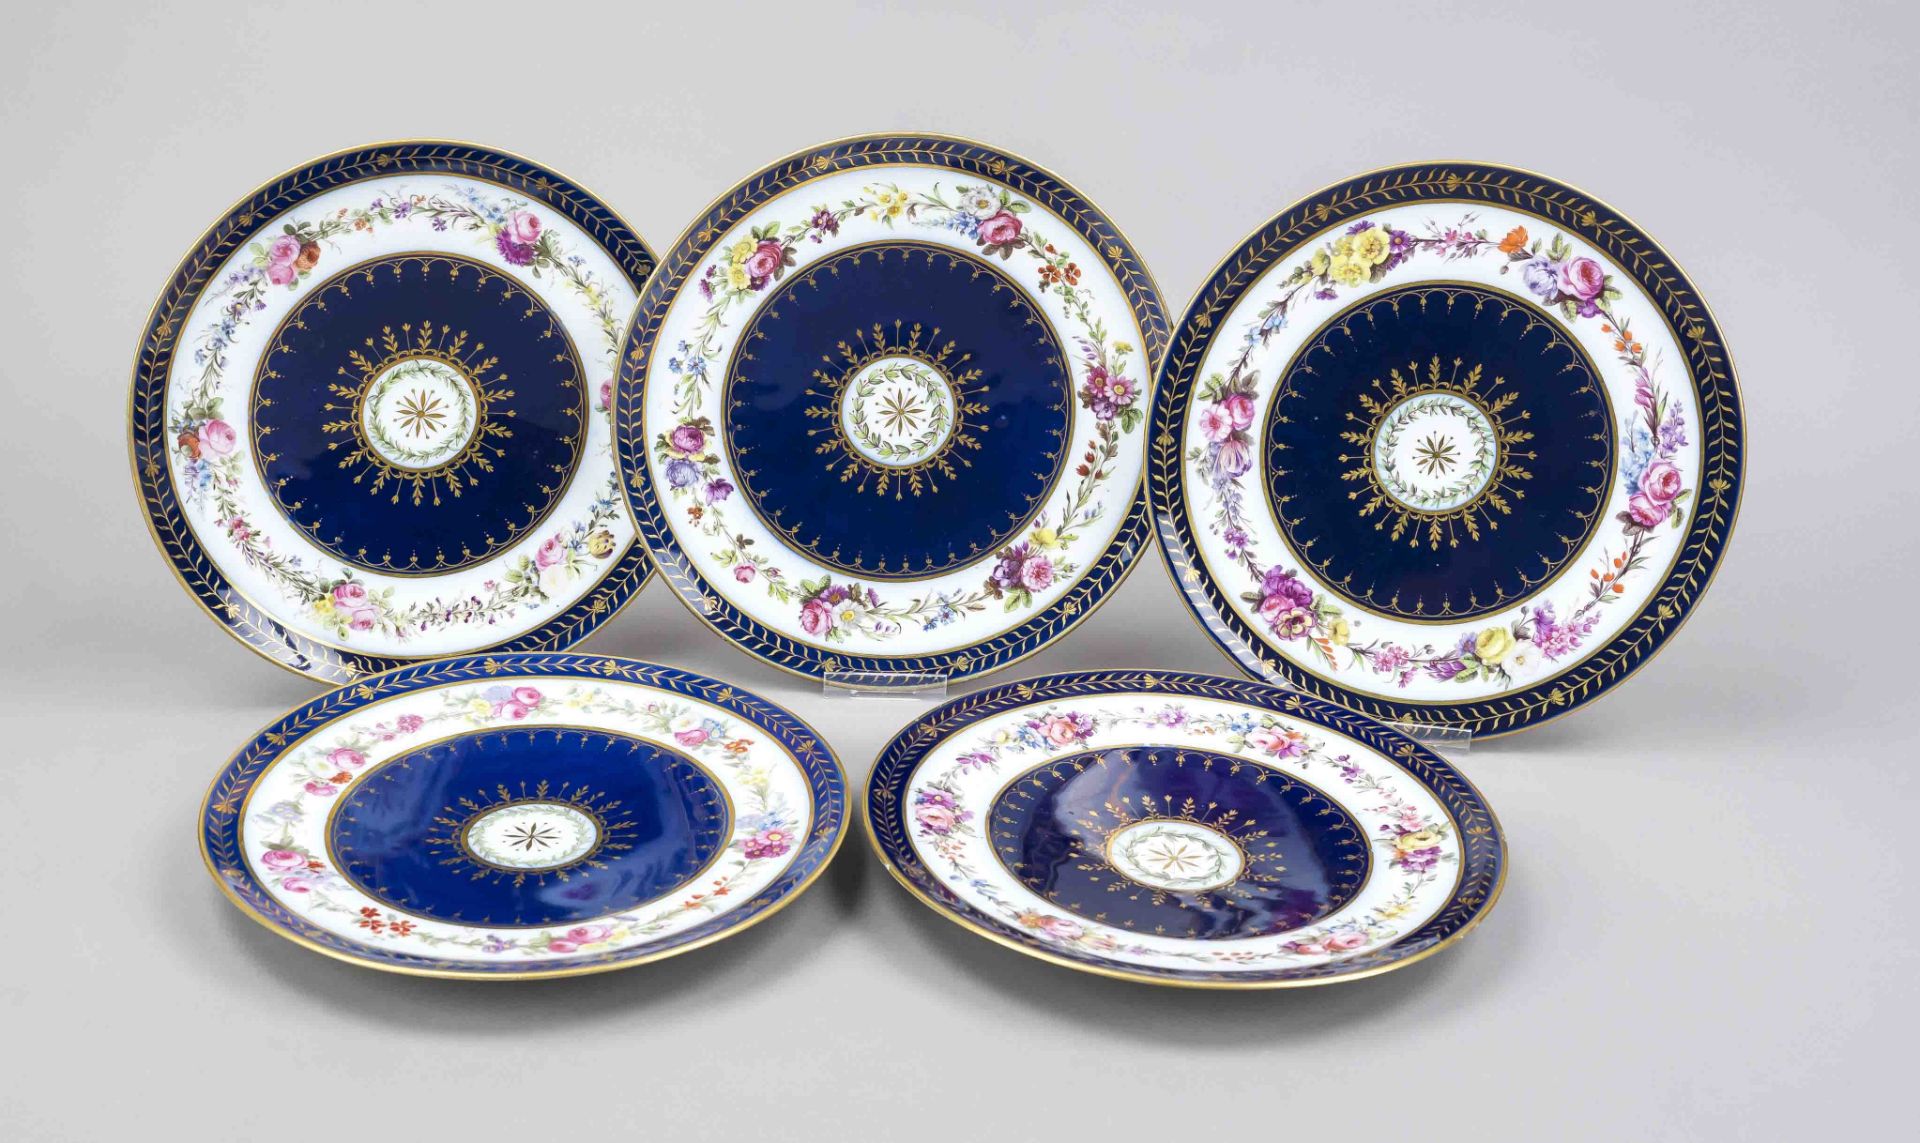 Five plates, France, marked Sevres, flat plate, central rosette surrounded by laurel garland and